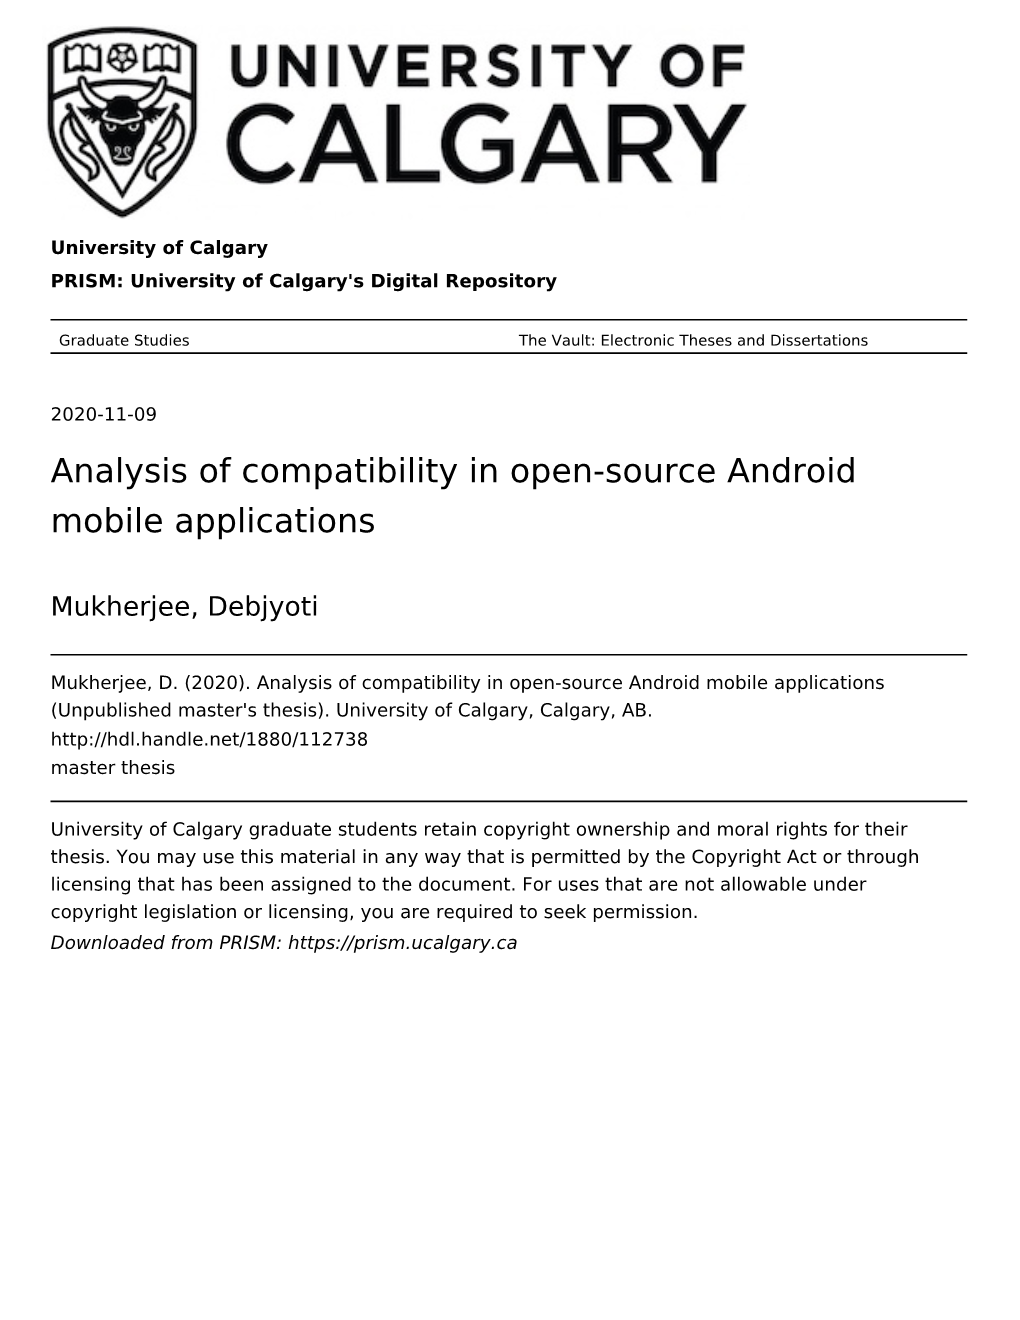 Analysis of Compatibility in Open-Source Android Mobile Applications